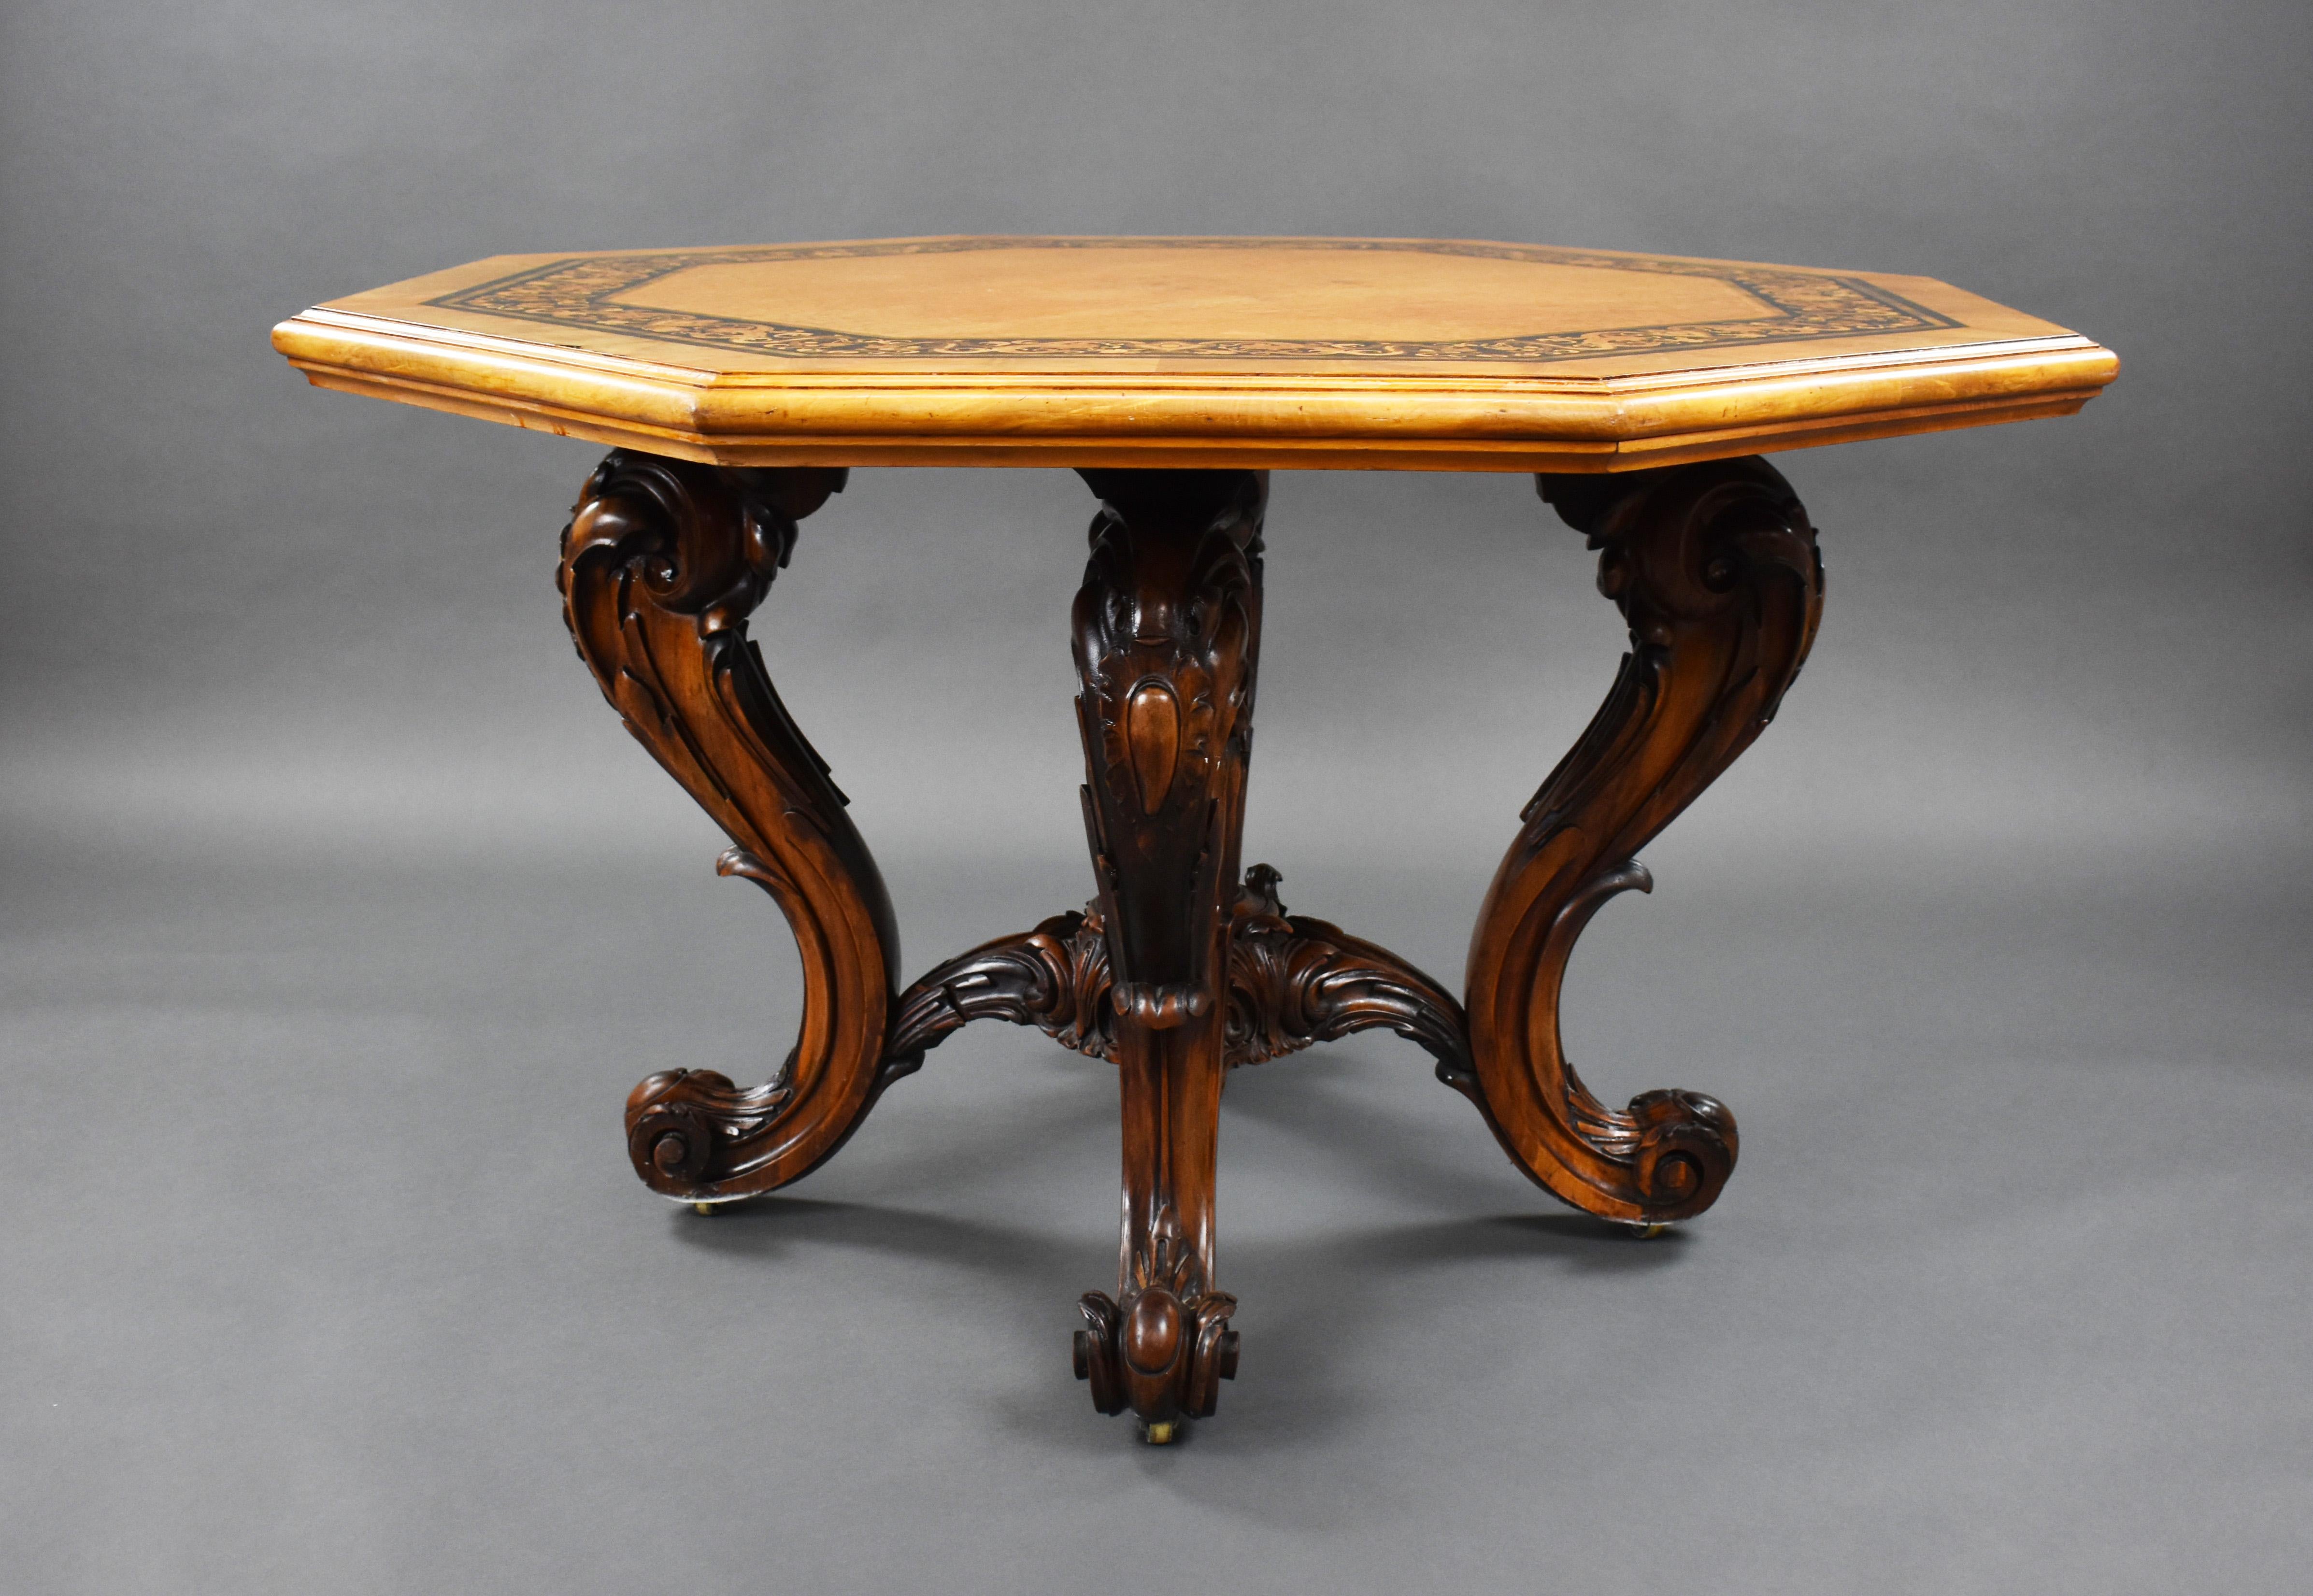 A good quality Victorian burr walnut center table, having a marquetry inlaid top, above ornately carved walnut legs united by a central stretcher with carved center motif, raised on brass castors. The table remains in good, untouched